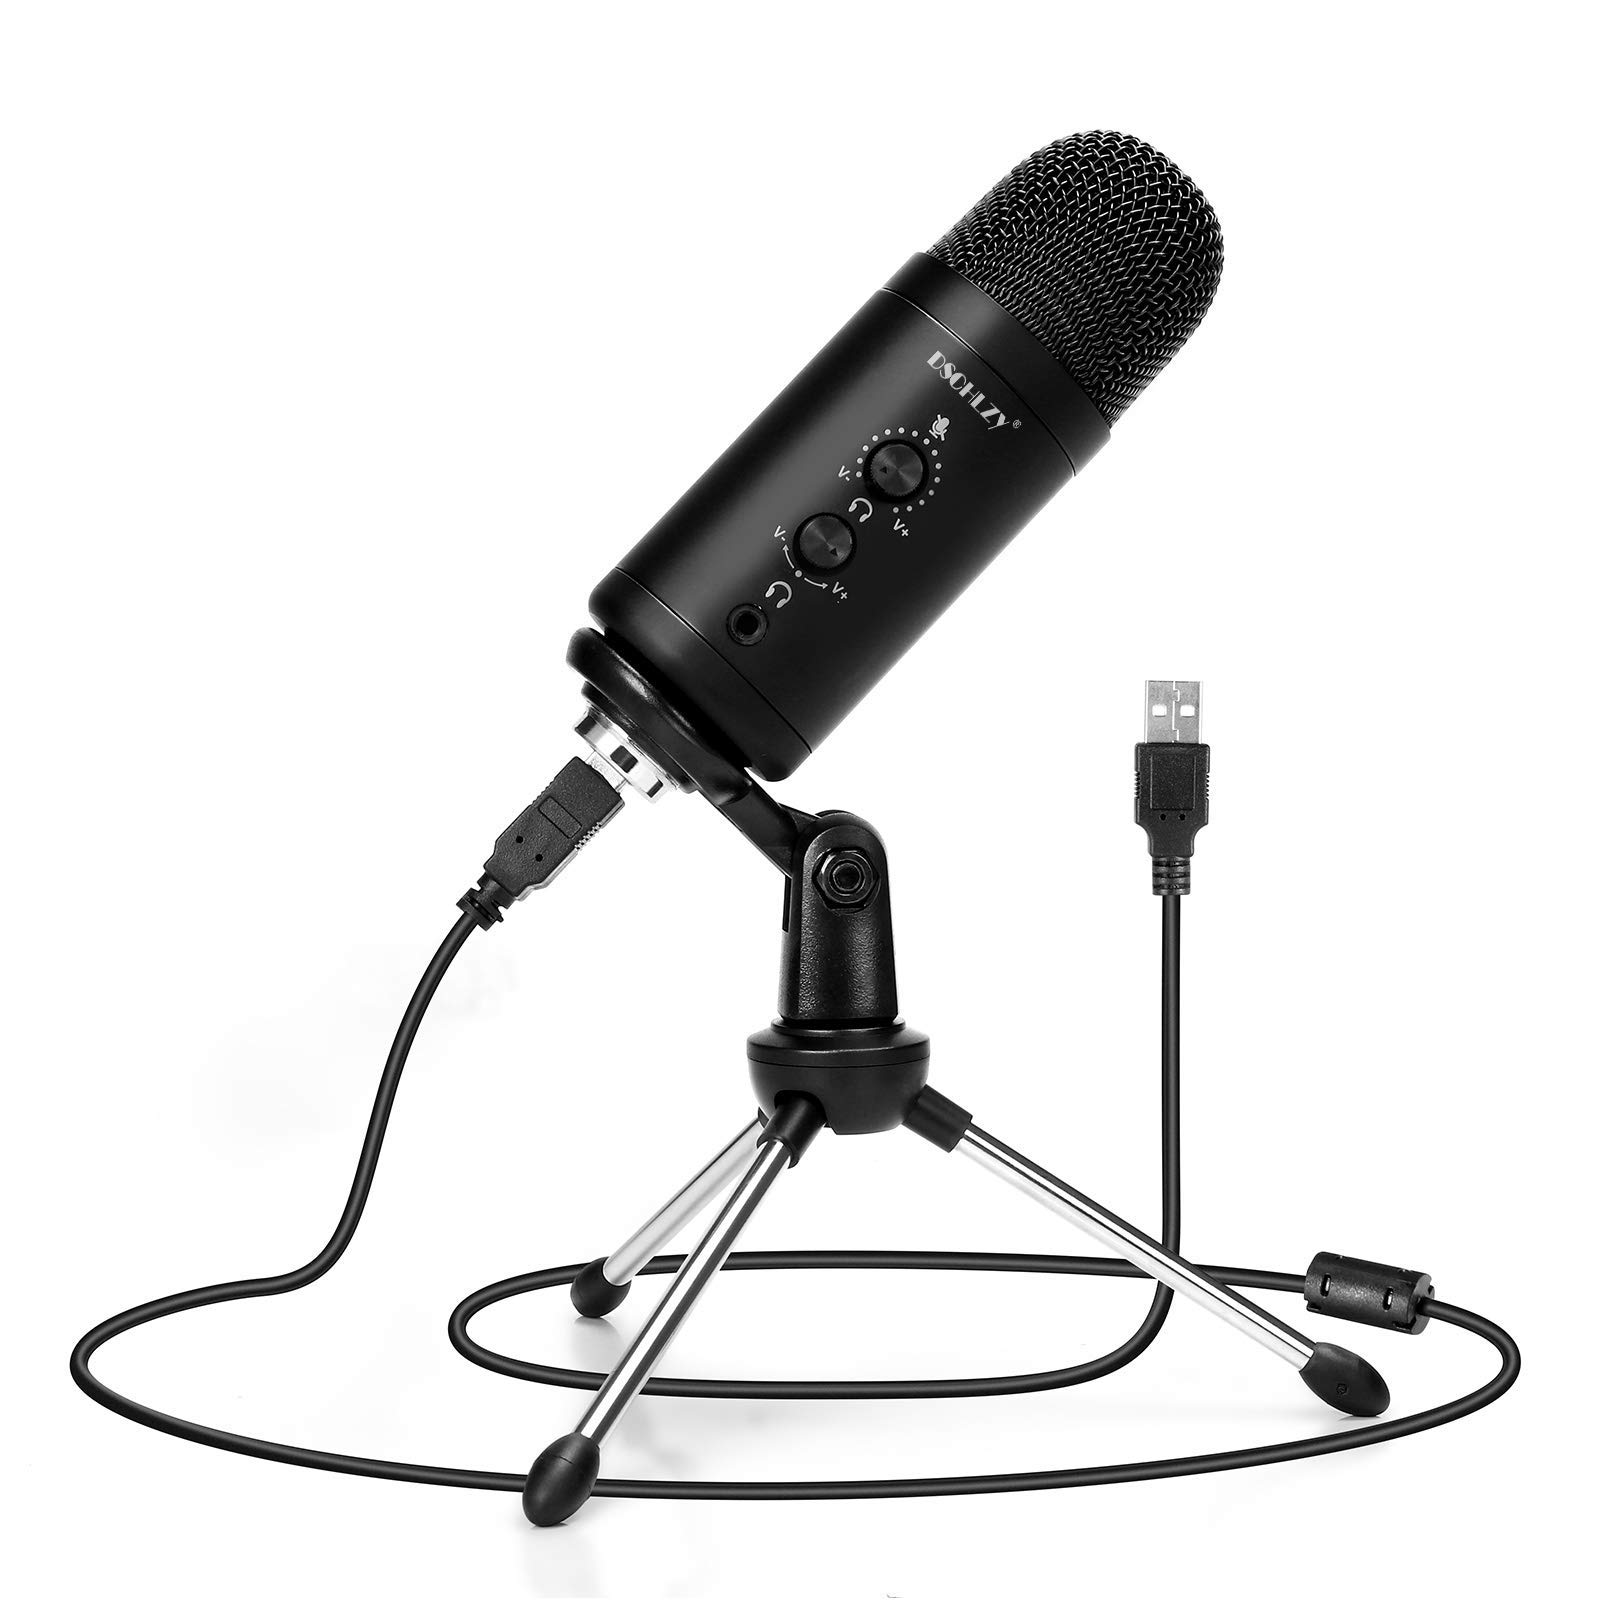 How Can I Use An Omnidirectional Condenser Microphone For PC Voice Recognition